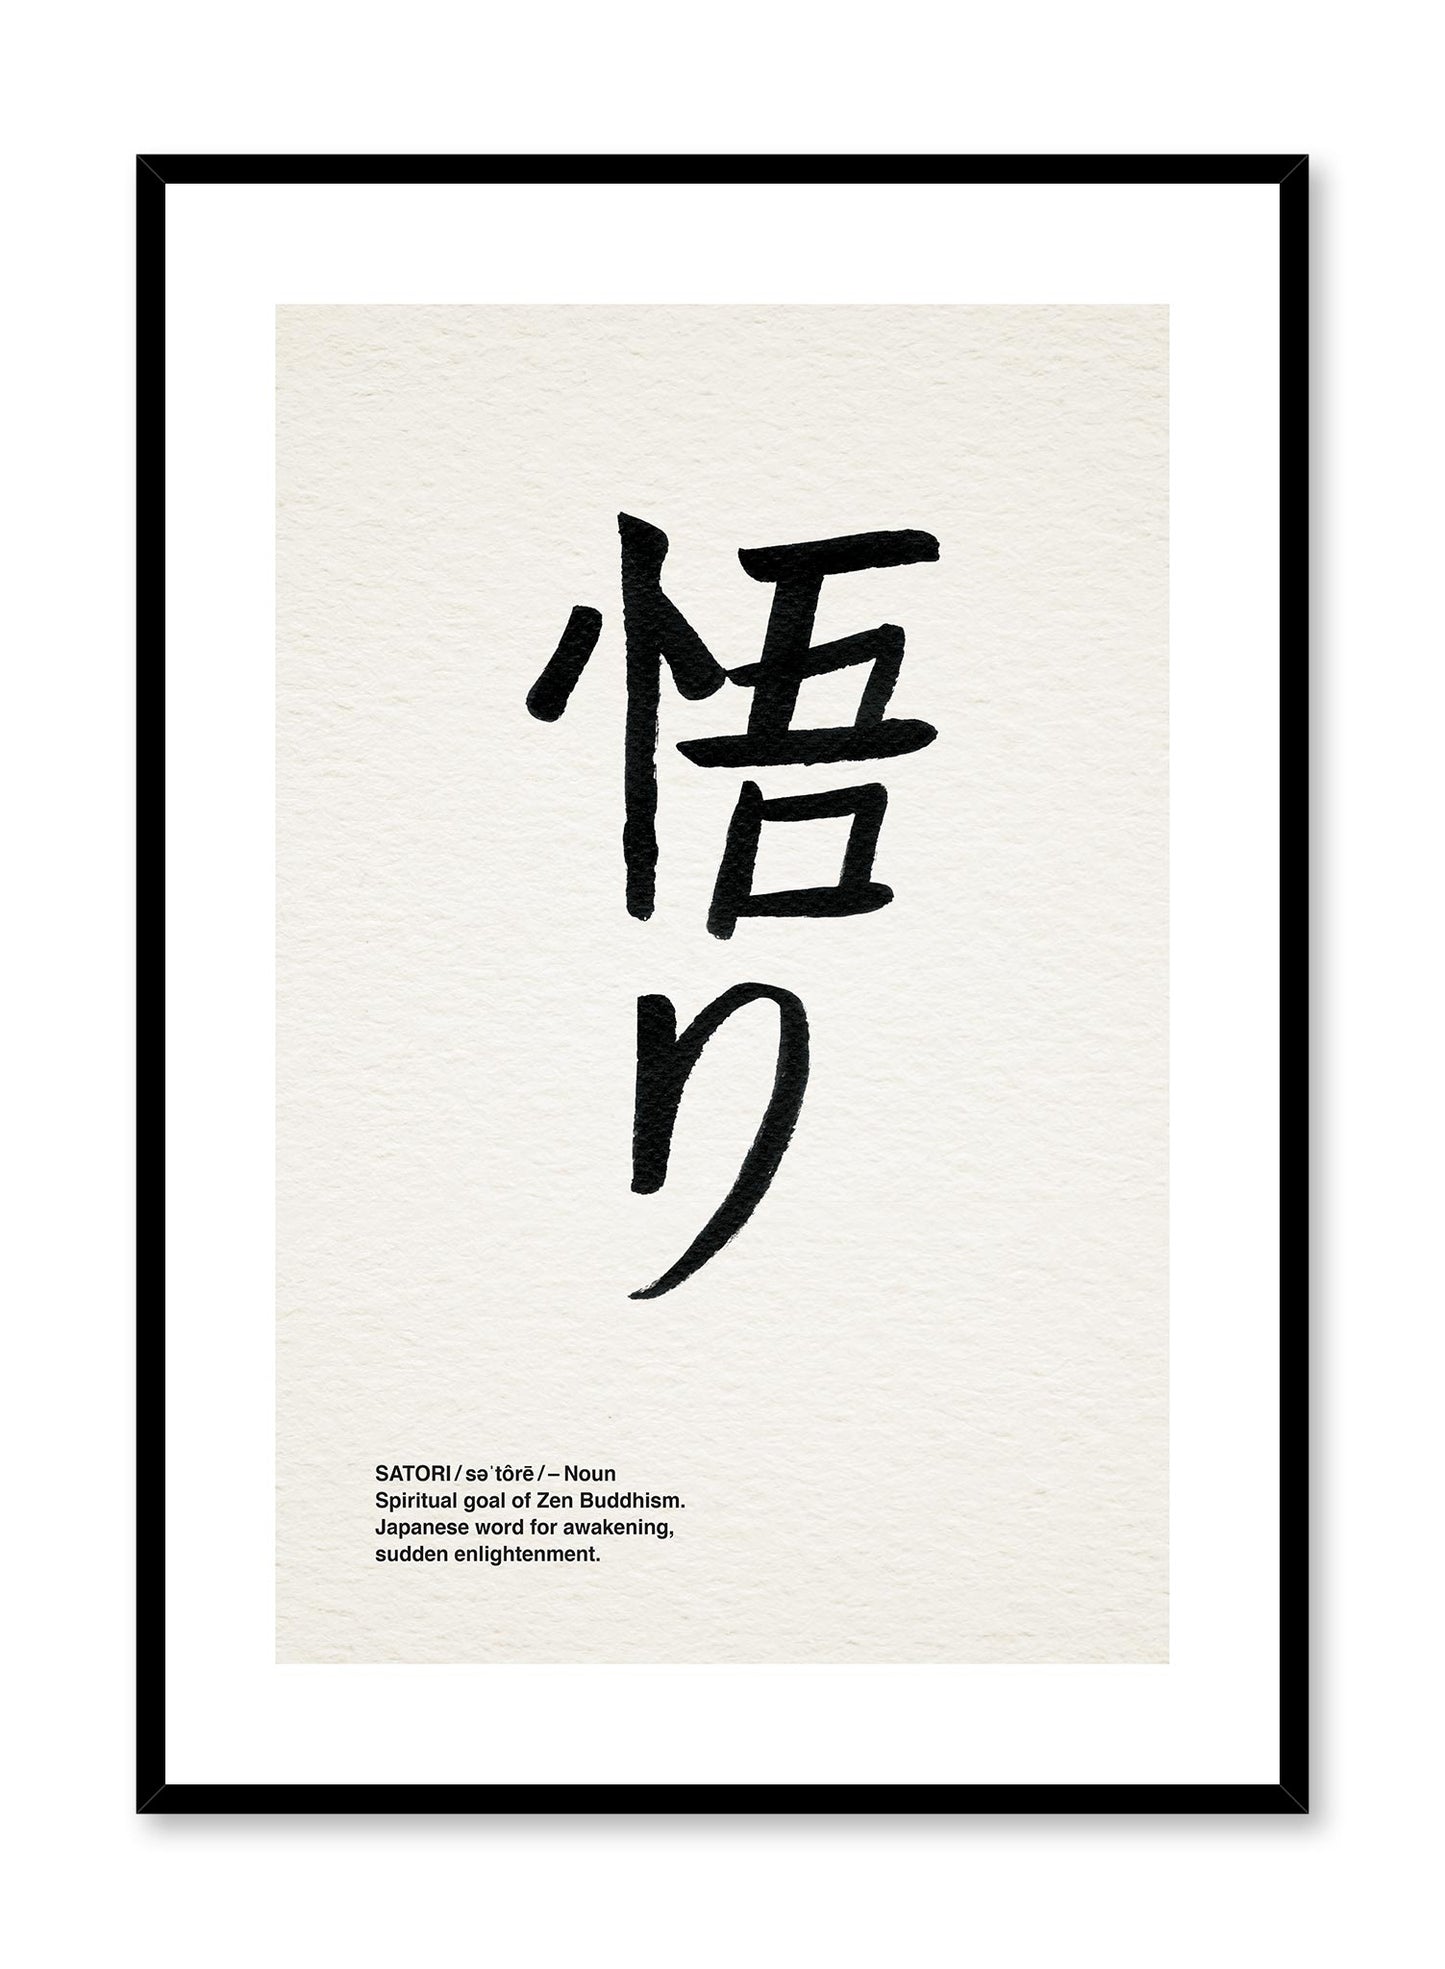 Satori Definition is a minimalist typography by Opposite Wall of the word "Satori" written in ink with its English definition at the bottom. 